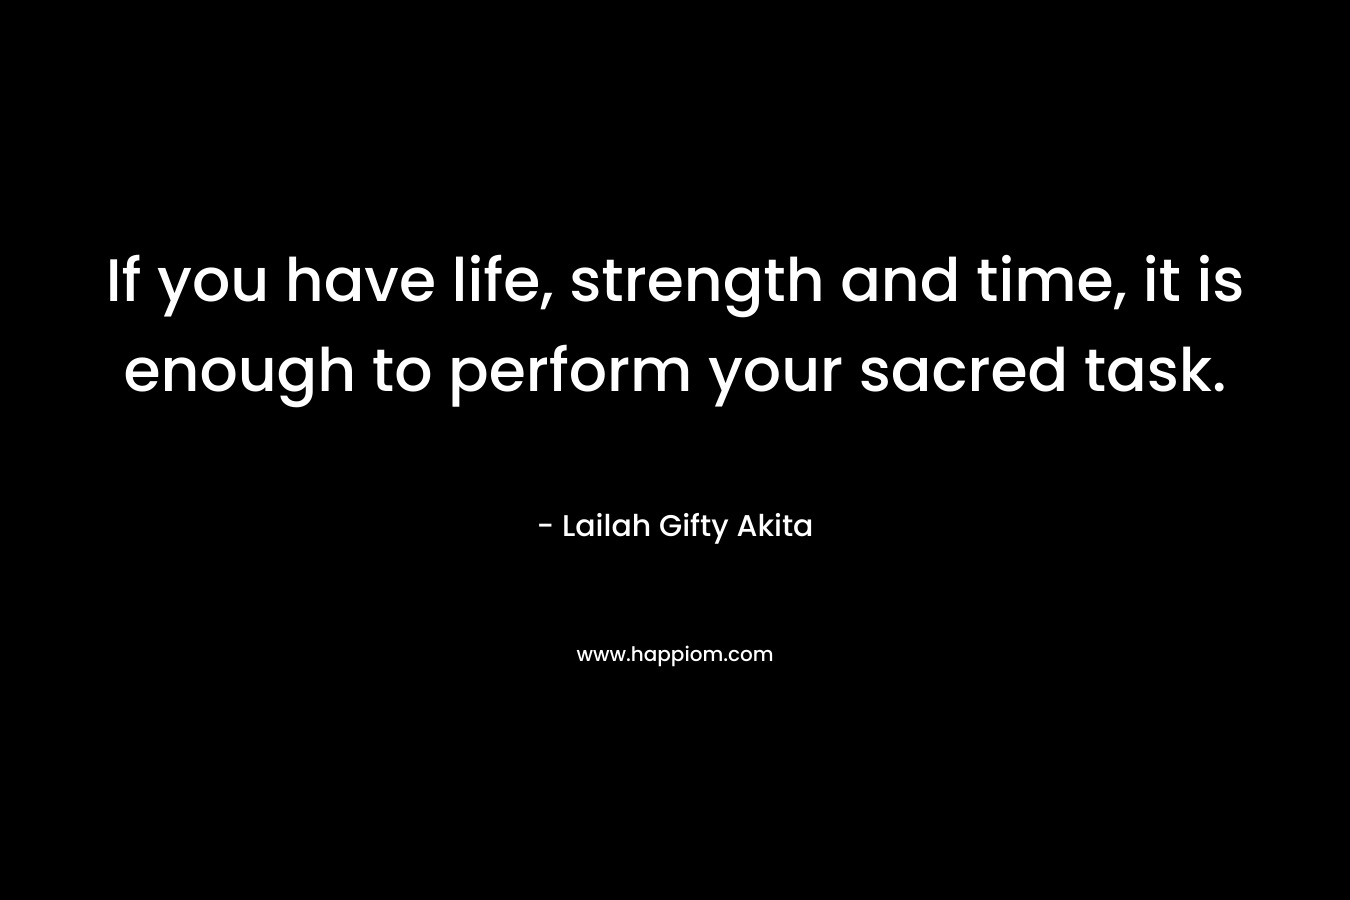 If you have life, strength and time, it is enough to perform your sacred task.